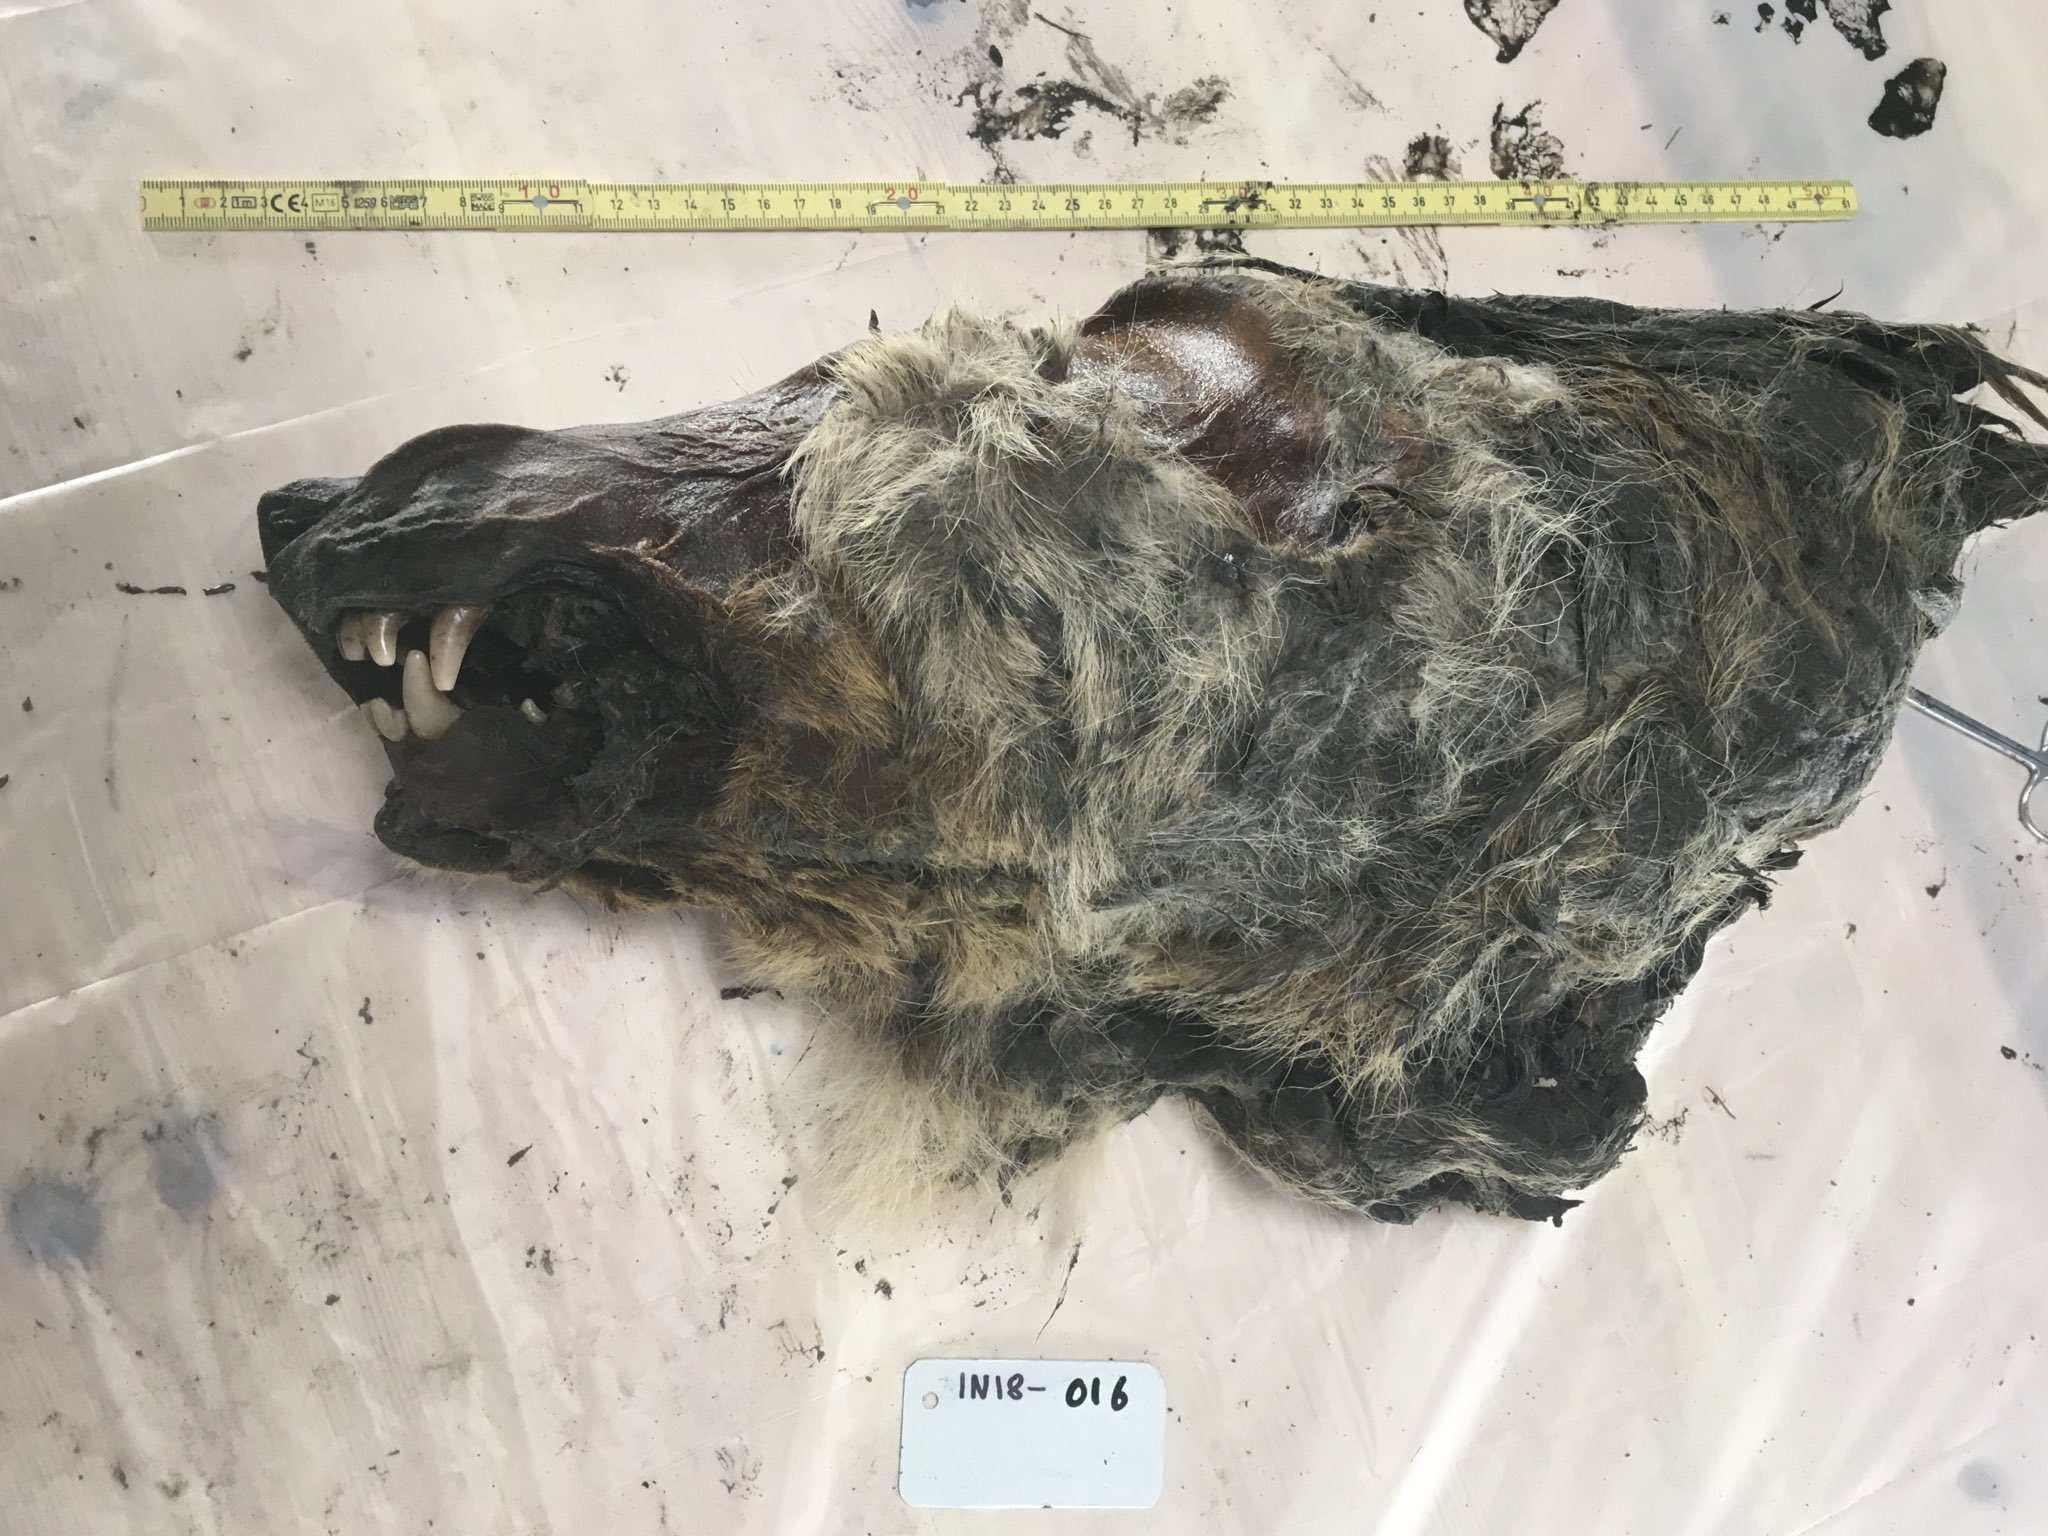 A perfectly preserved 32,000-year-old wolf head was found in Siberian permafrost 7